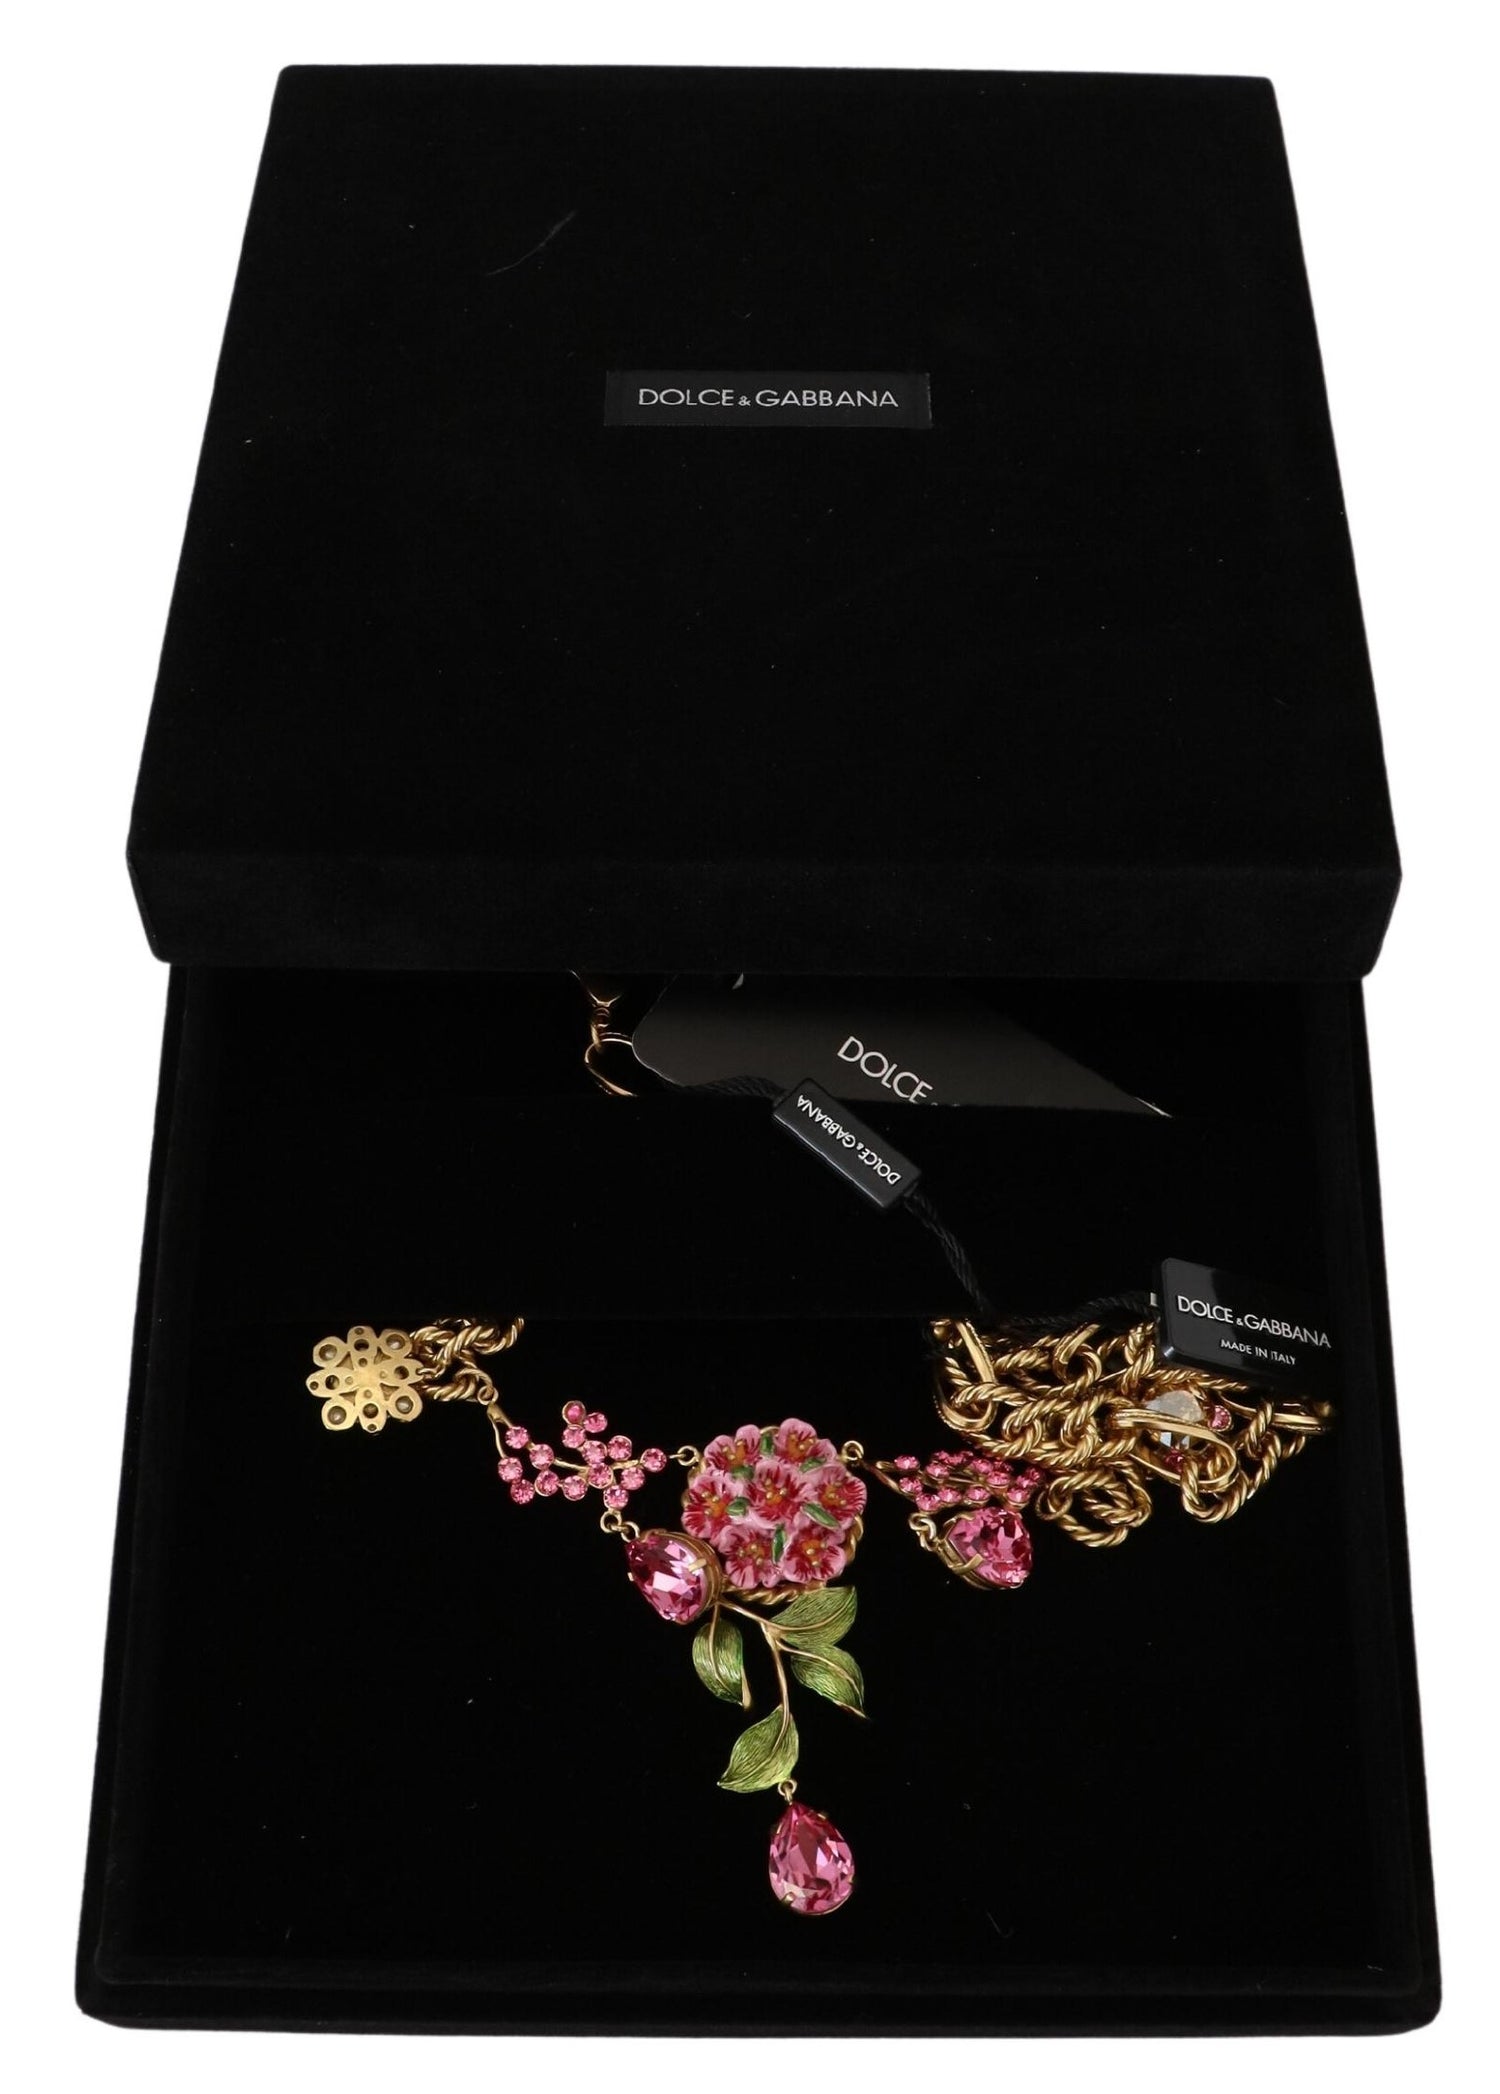 Dolce & Gabbana Gold Brass Chain Crystal Floral Roses Jewelry Necklace - DEA STILOSA MILANO